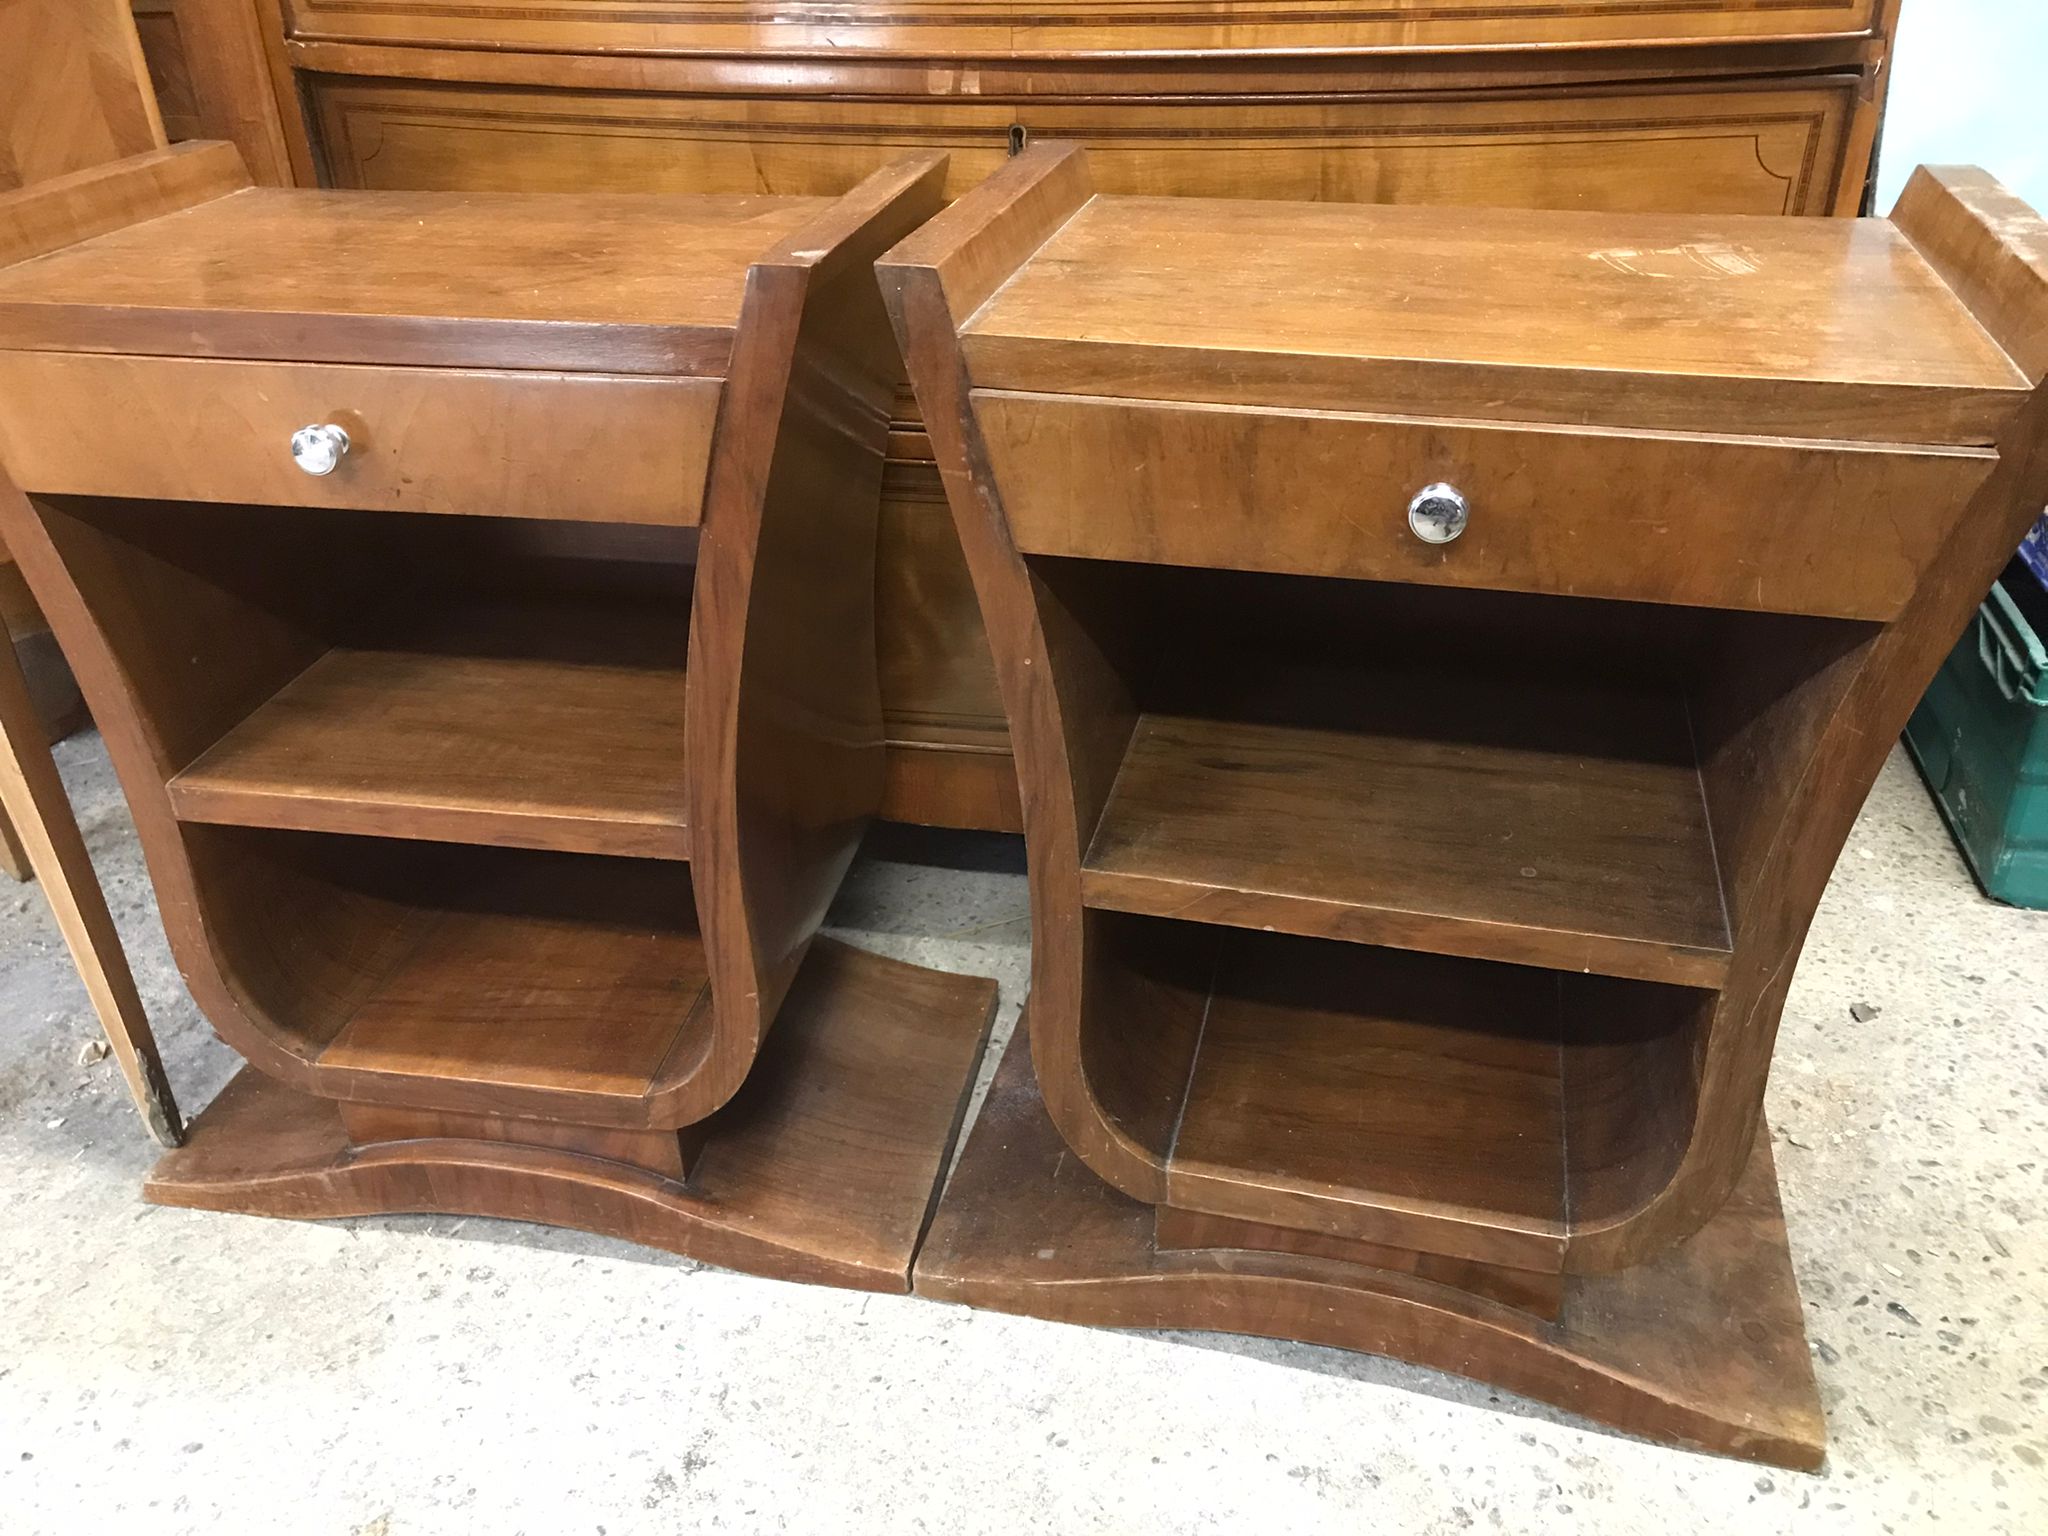 PAIR OF FRENCH ART DECO BEDSIDE CABINETS